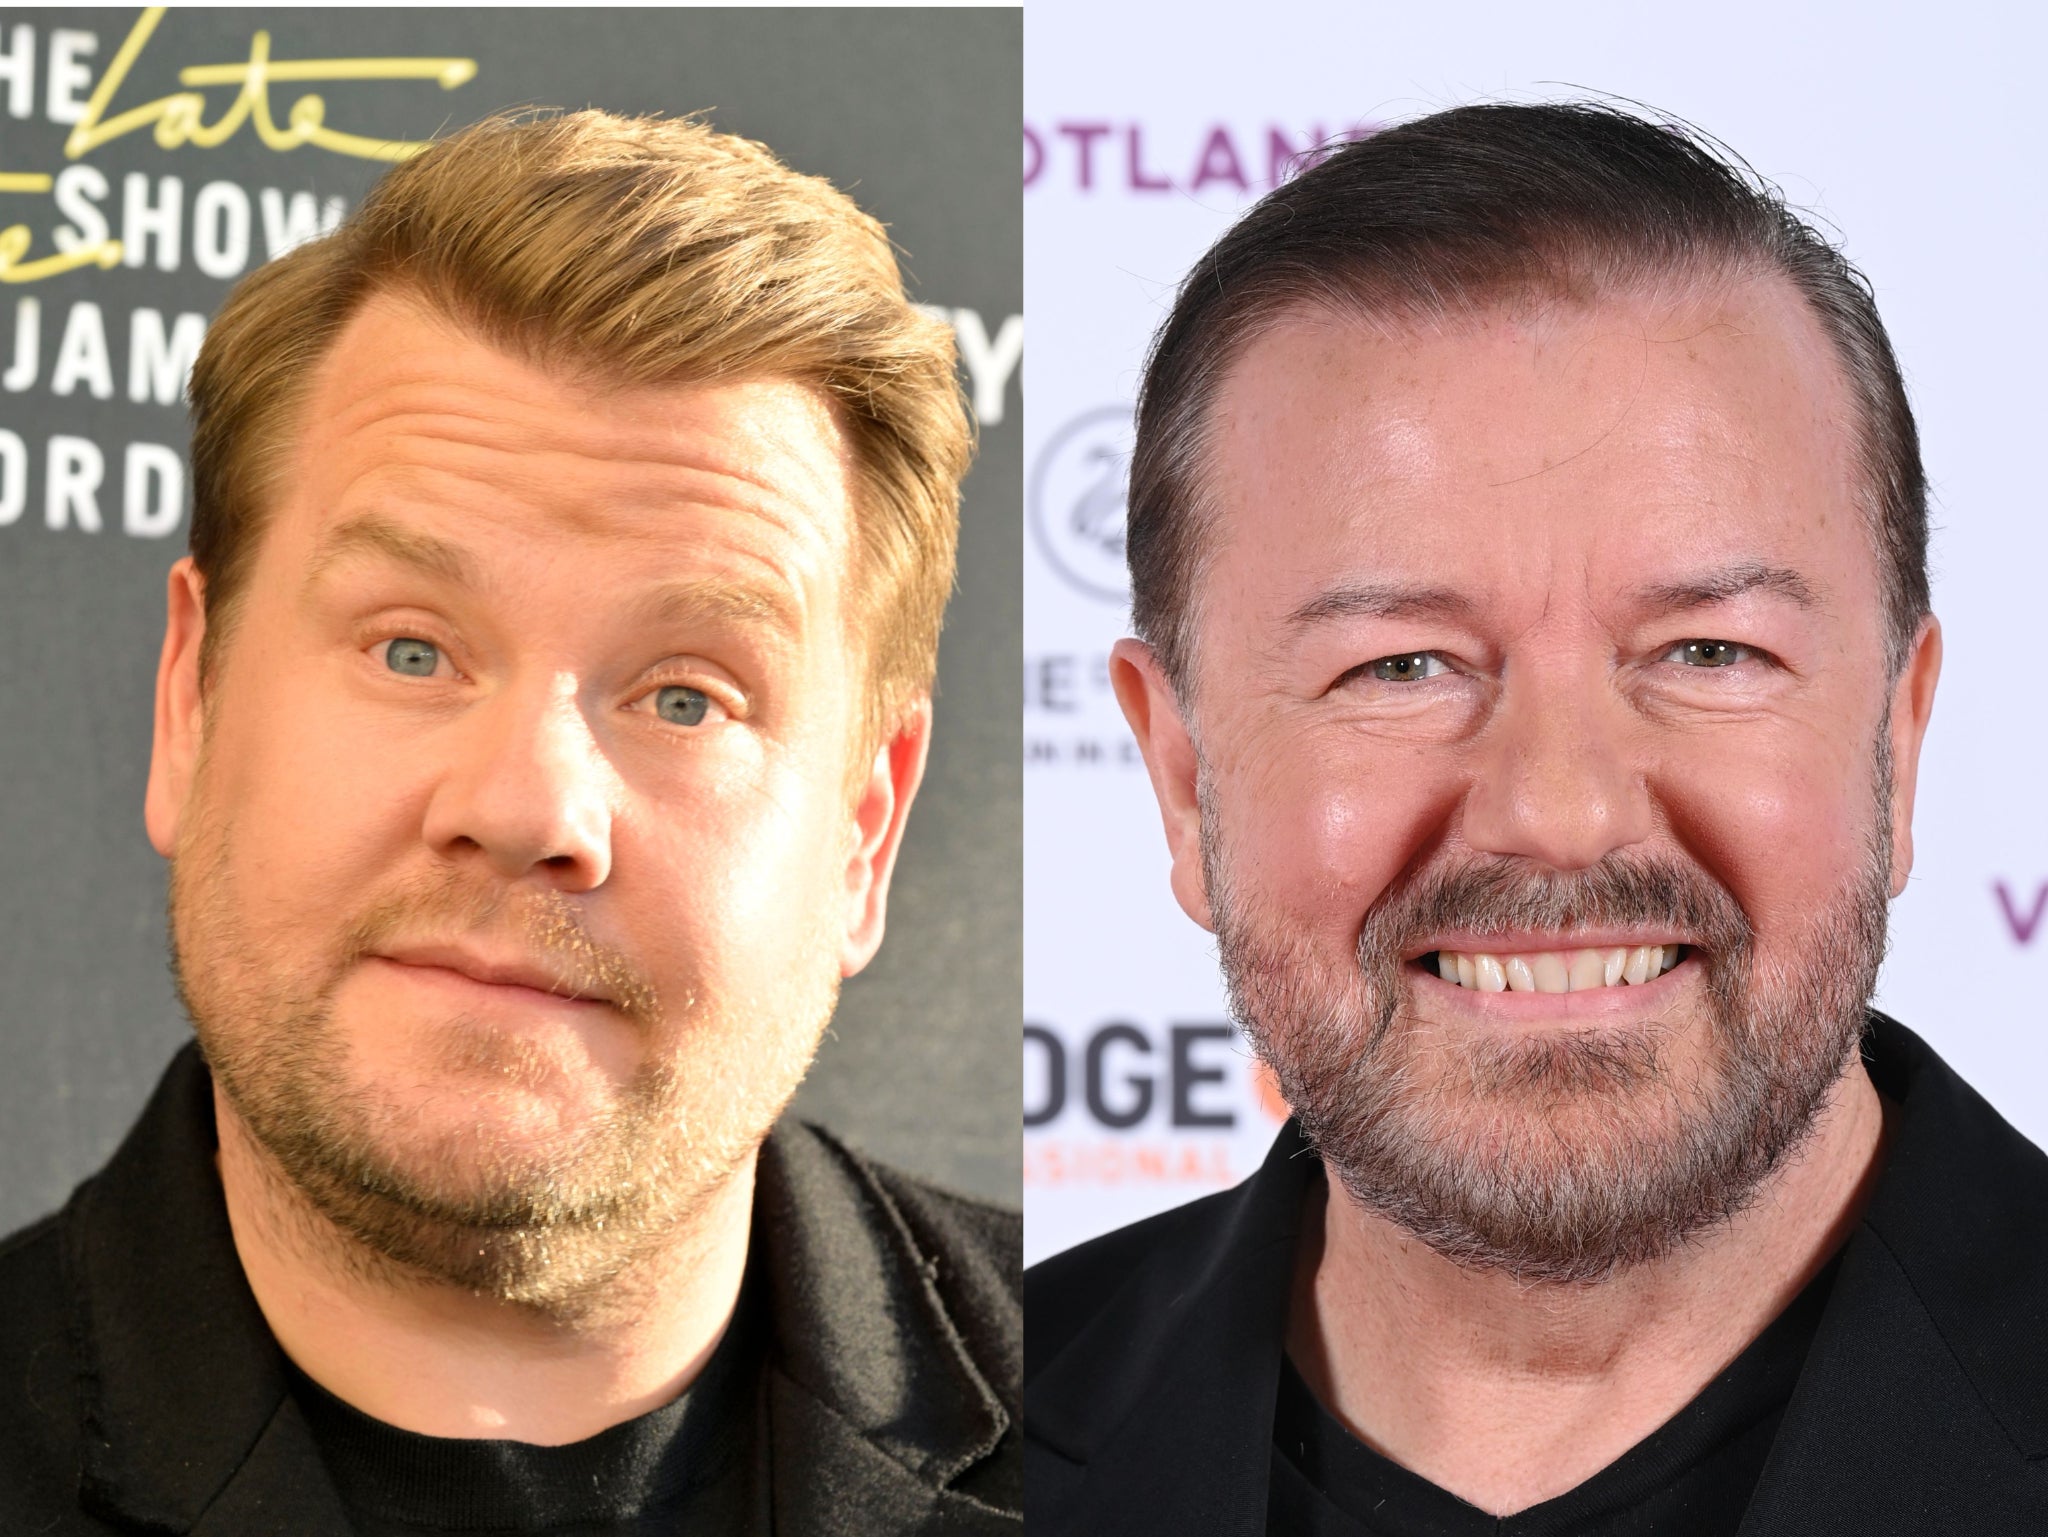 James Corden (left) and Ricky Gervais